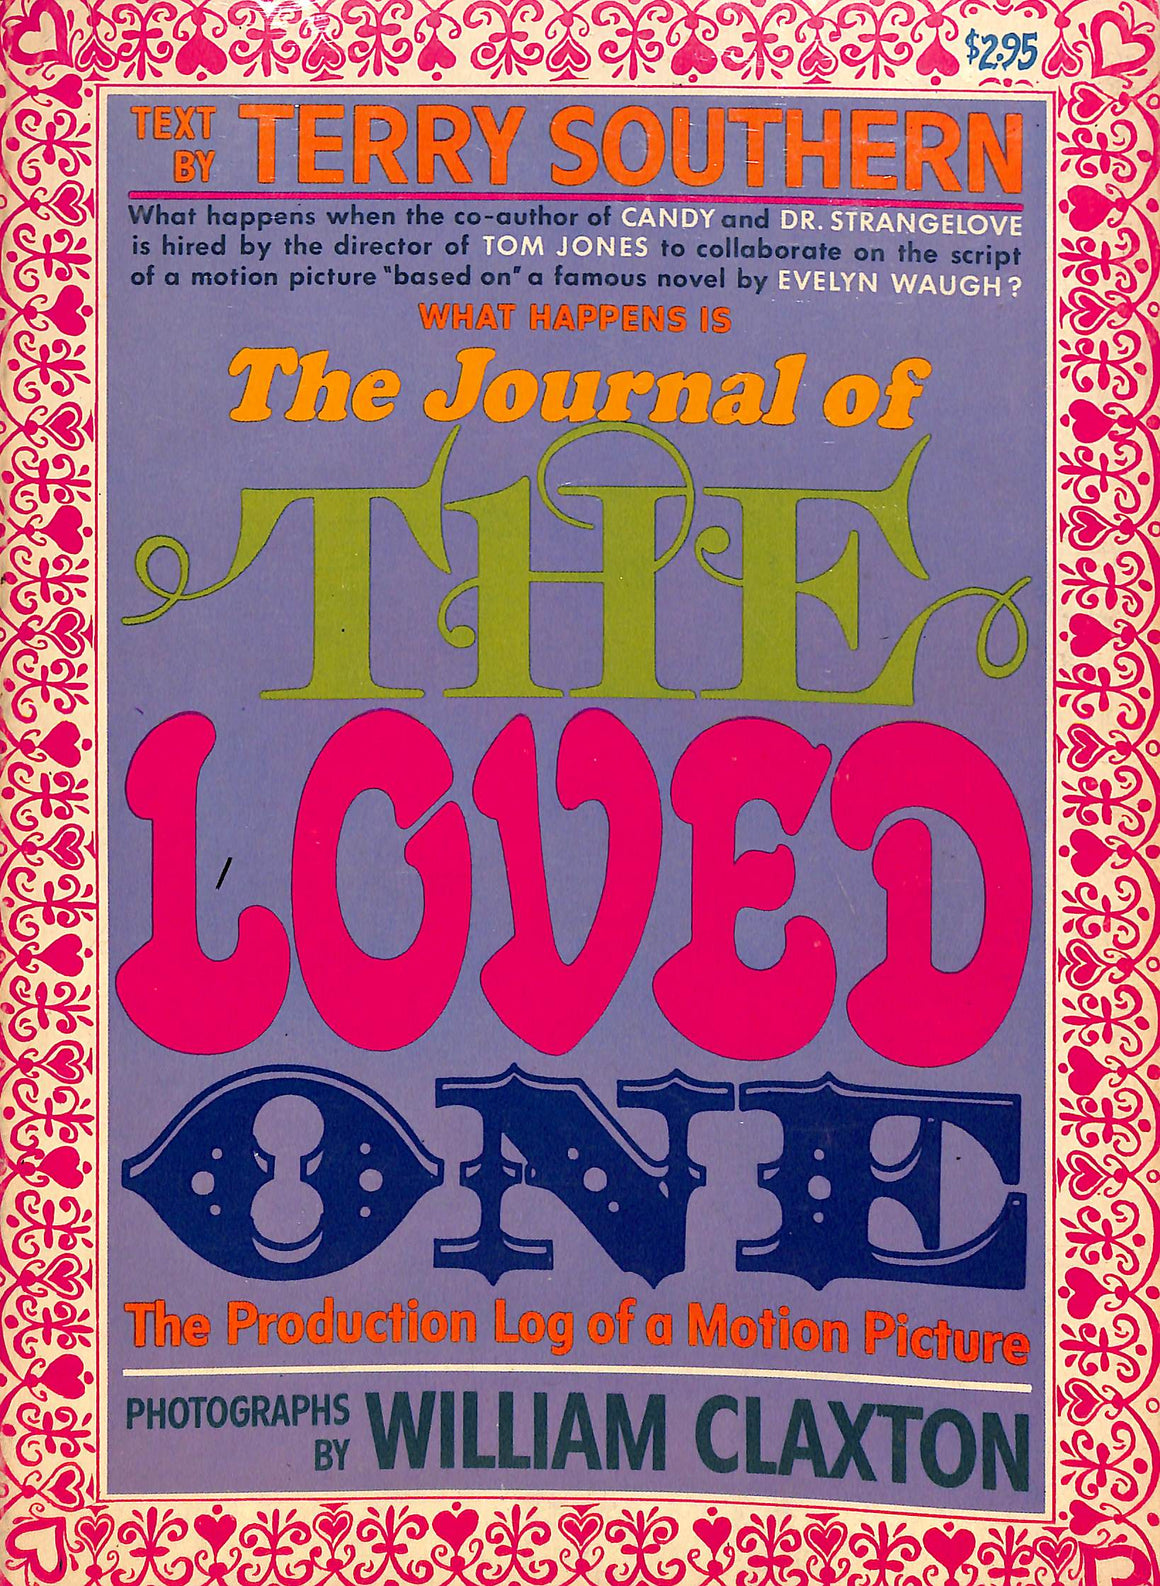 "The Journal of The Loved One The Production Of A  Long Motion Picture" 1965 SOUTHERN, Terry [text by]